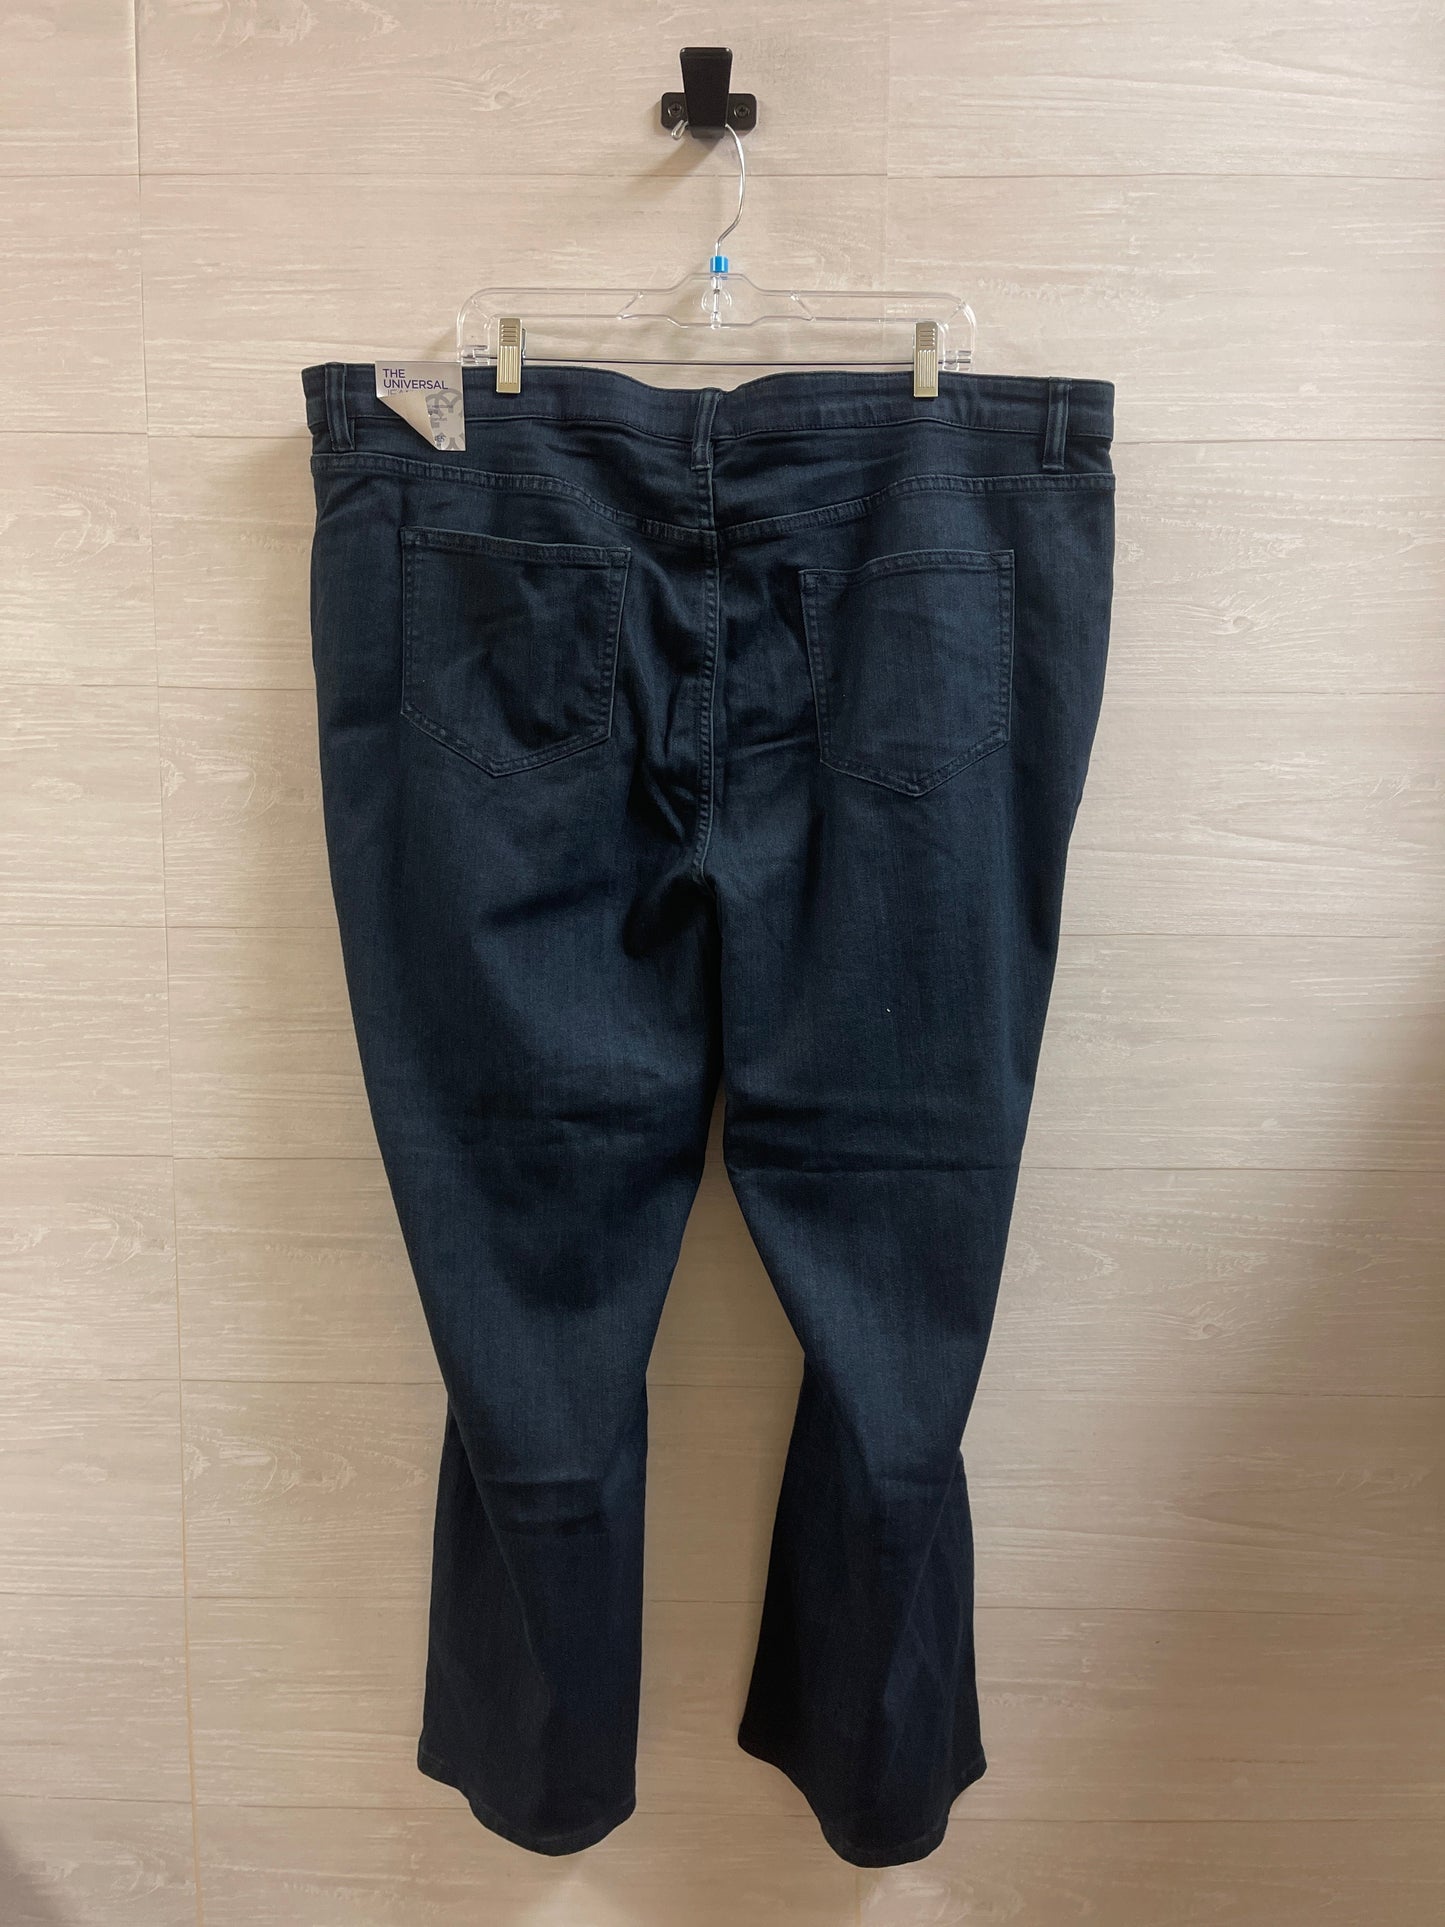 Jeans Boot Cut By Catherines  Size: 26